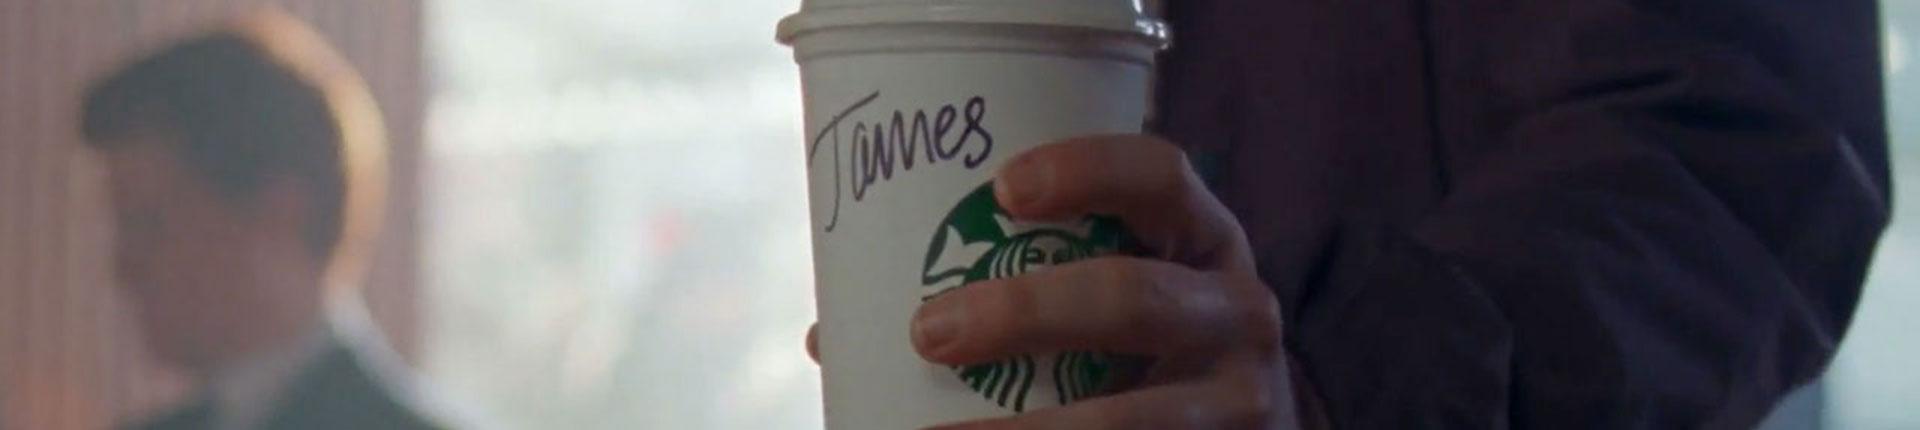 Starbucks: What's your name?